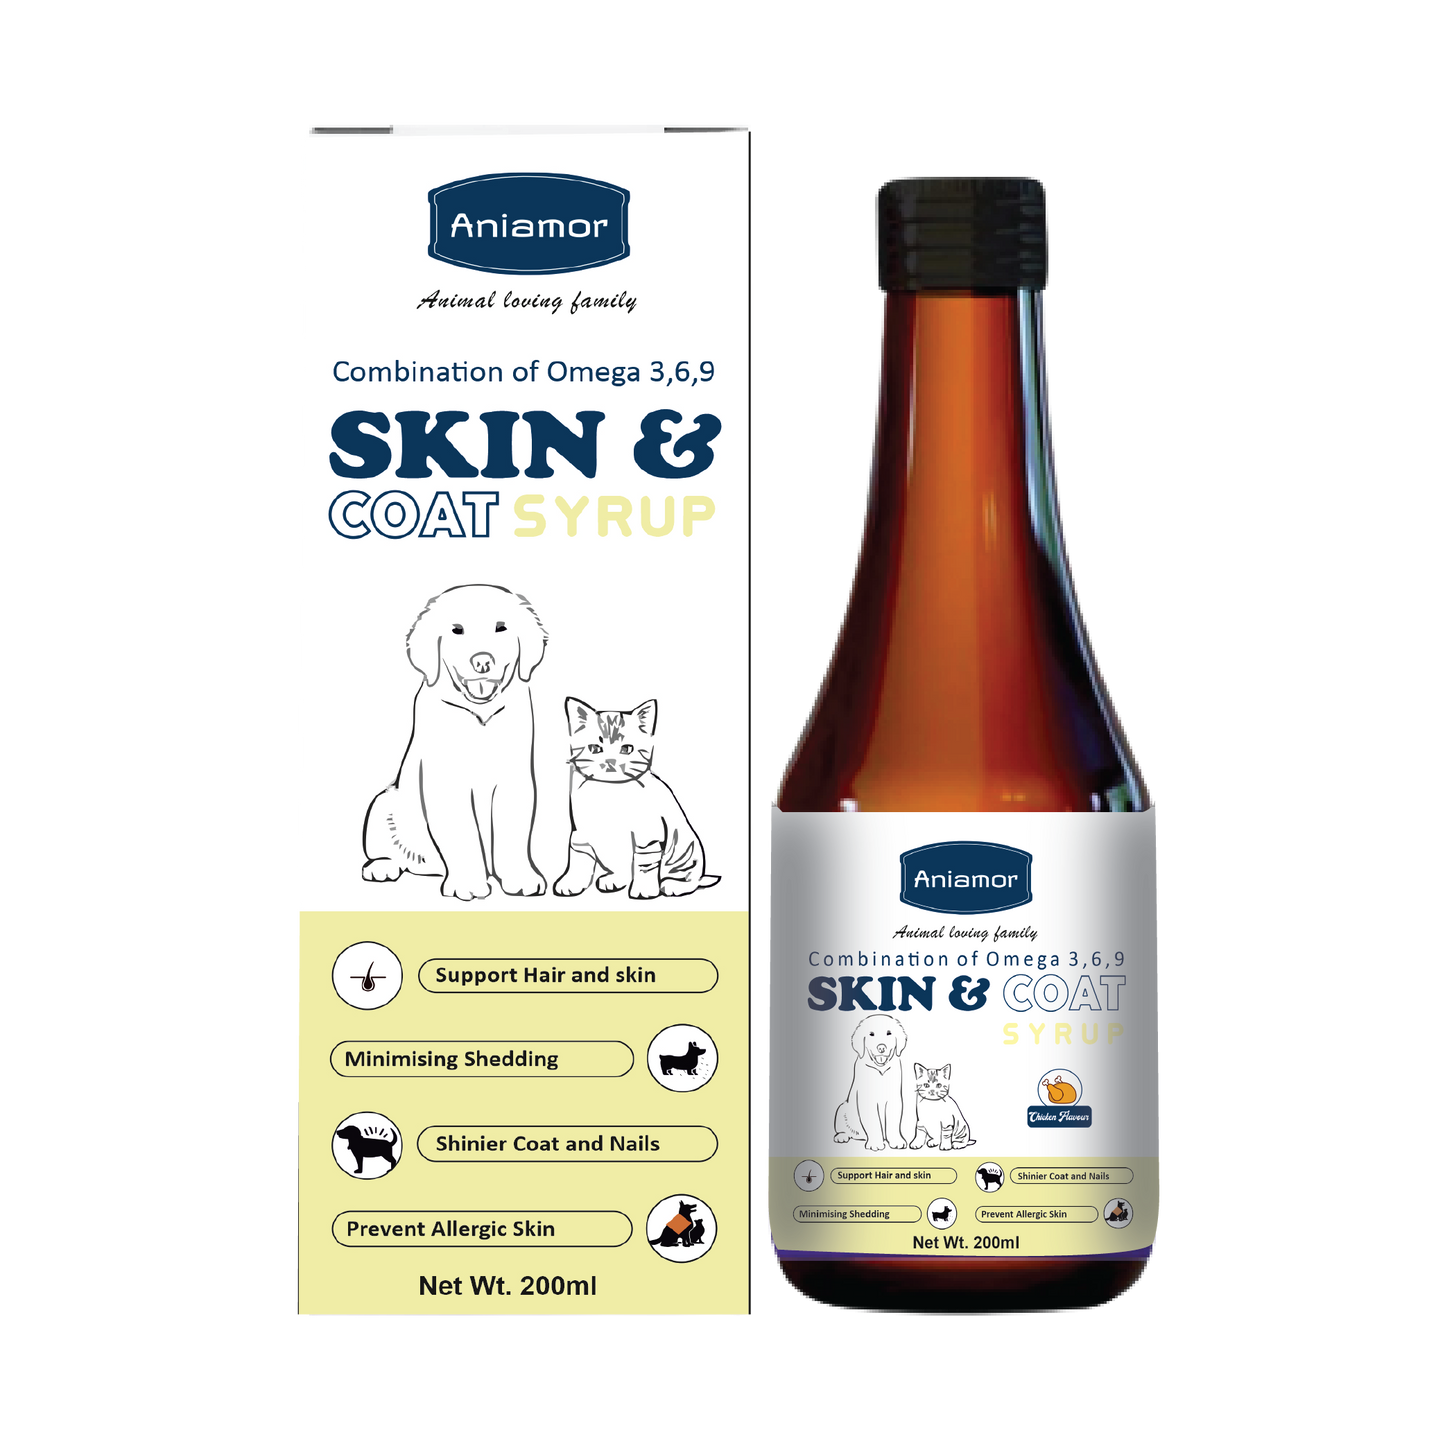 Skin And Coat Syrup for Dog & Cat-Aniamor| Omega 3&6 Fatty acids syrup|200ml